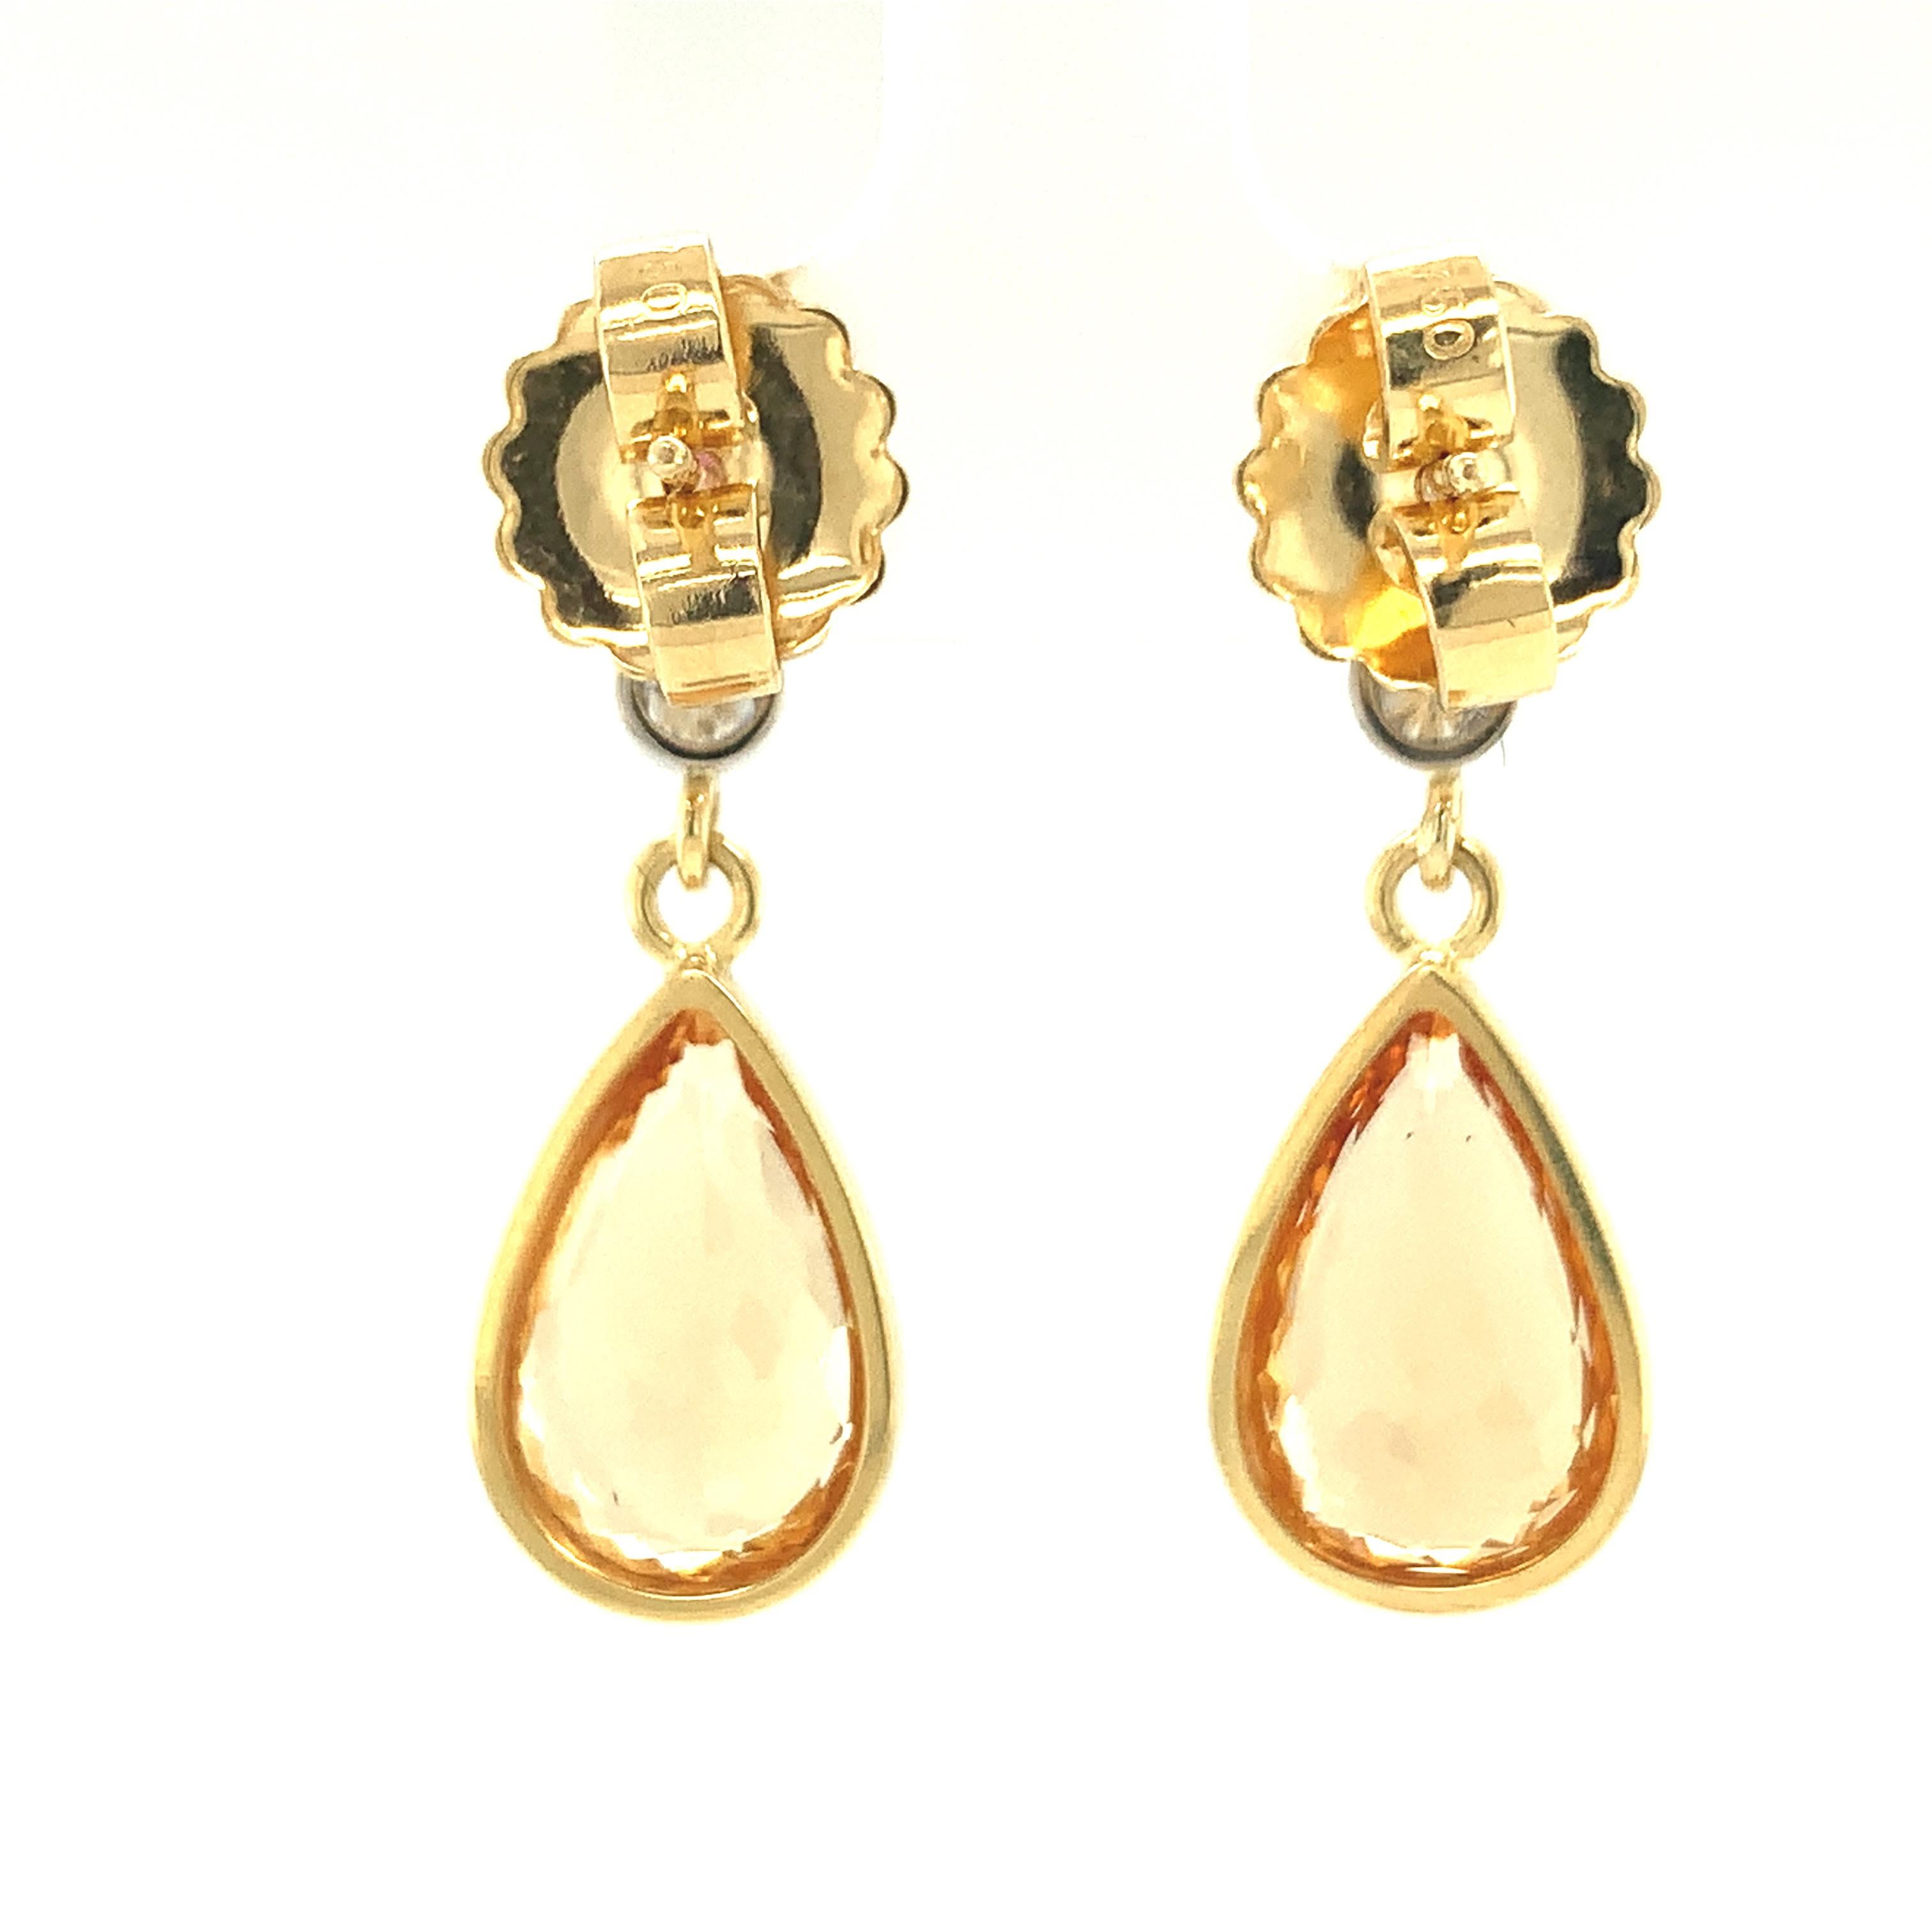 Precious Topaz and Garnet Drop Earrings 18K Yellow Gold, 9.74 Carats Total  In New Condition For Sale In Los Angeles, CA